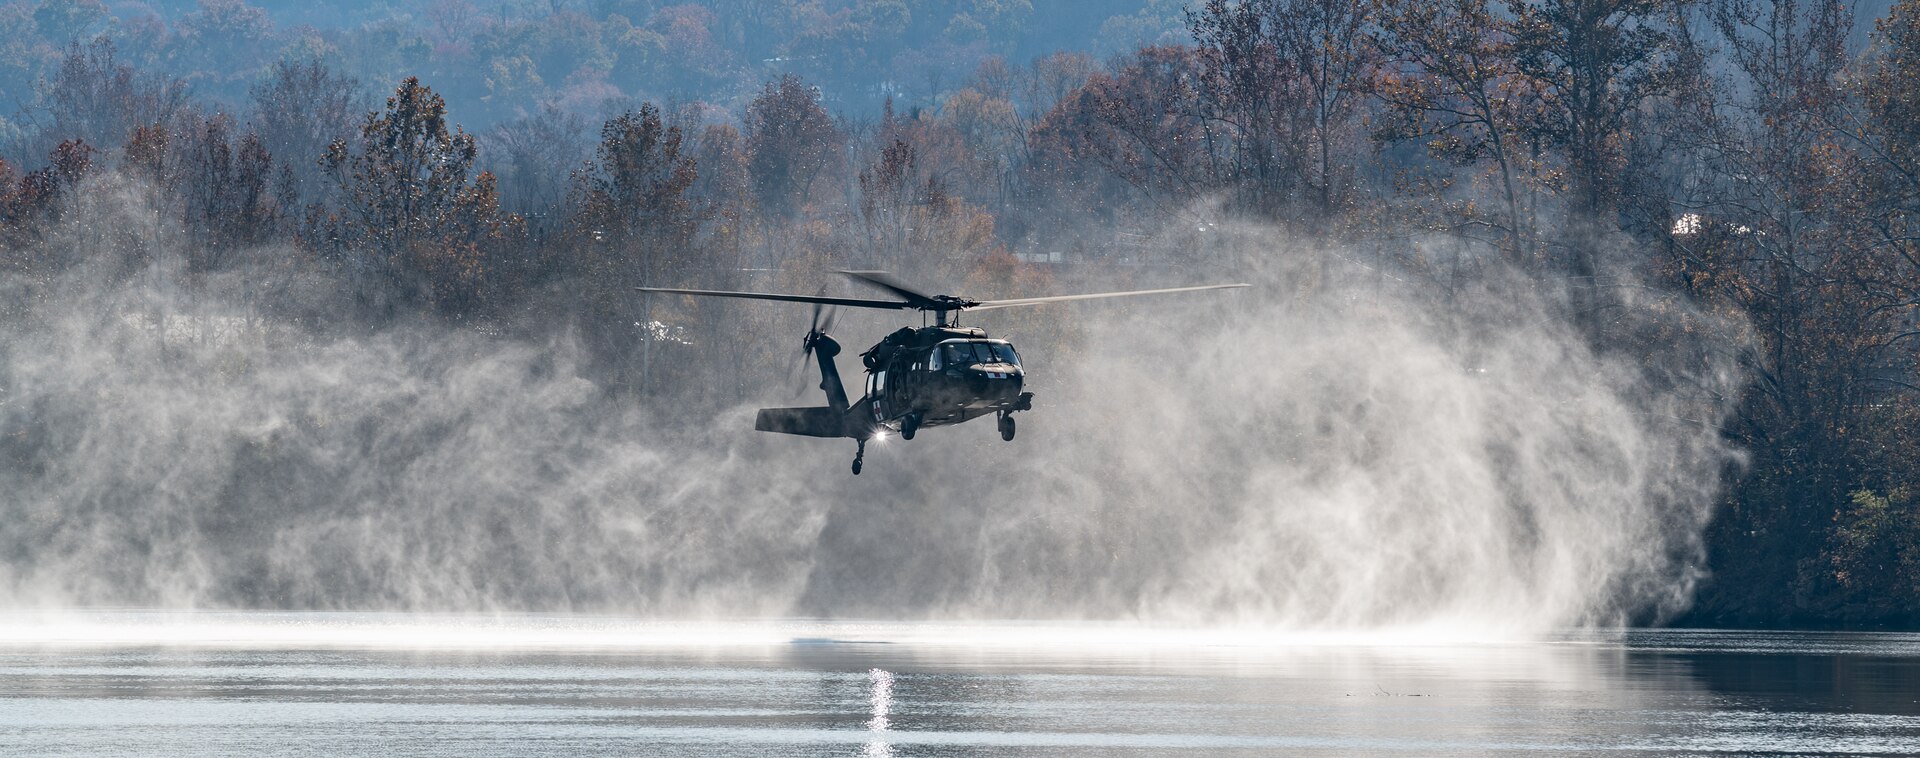 A West Virginia Army National Guard UH-60M Blackhawk helicopter flys low, close to river surface, creating a misty cloud around the helicopter.